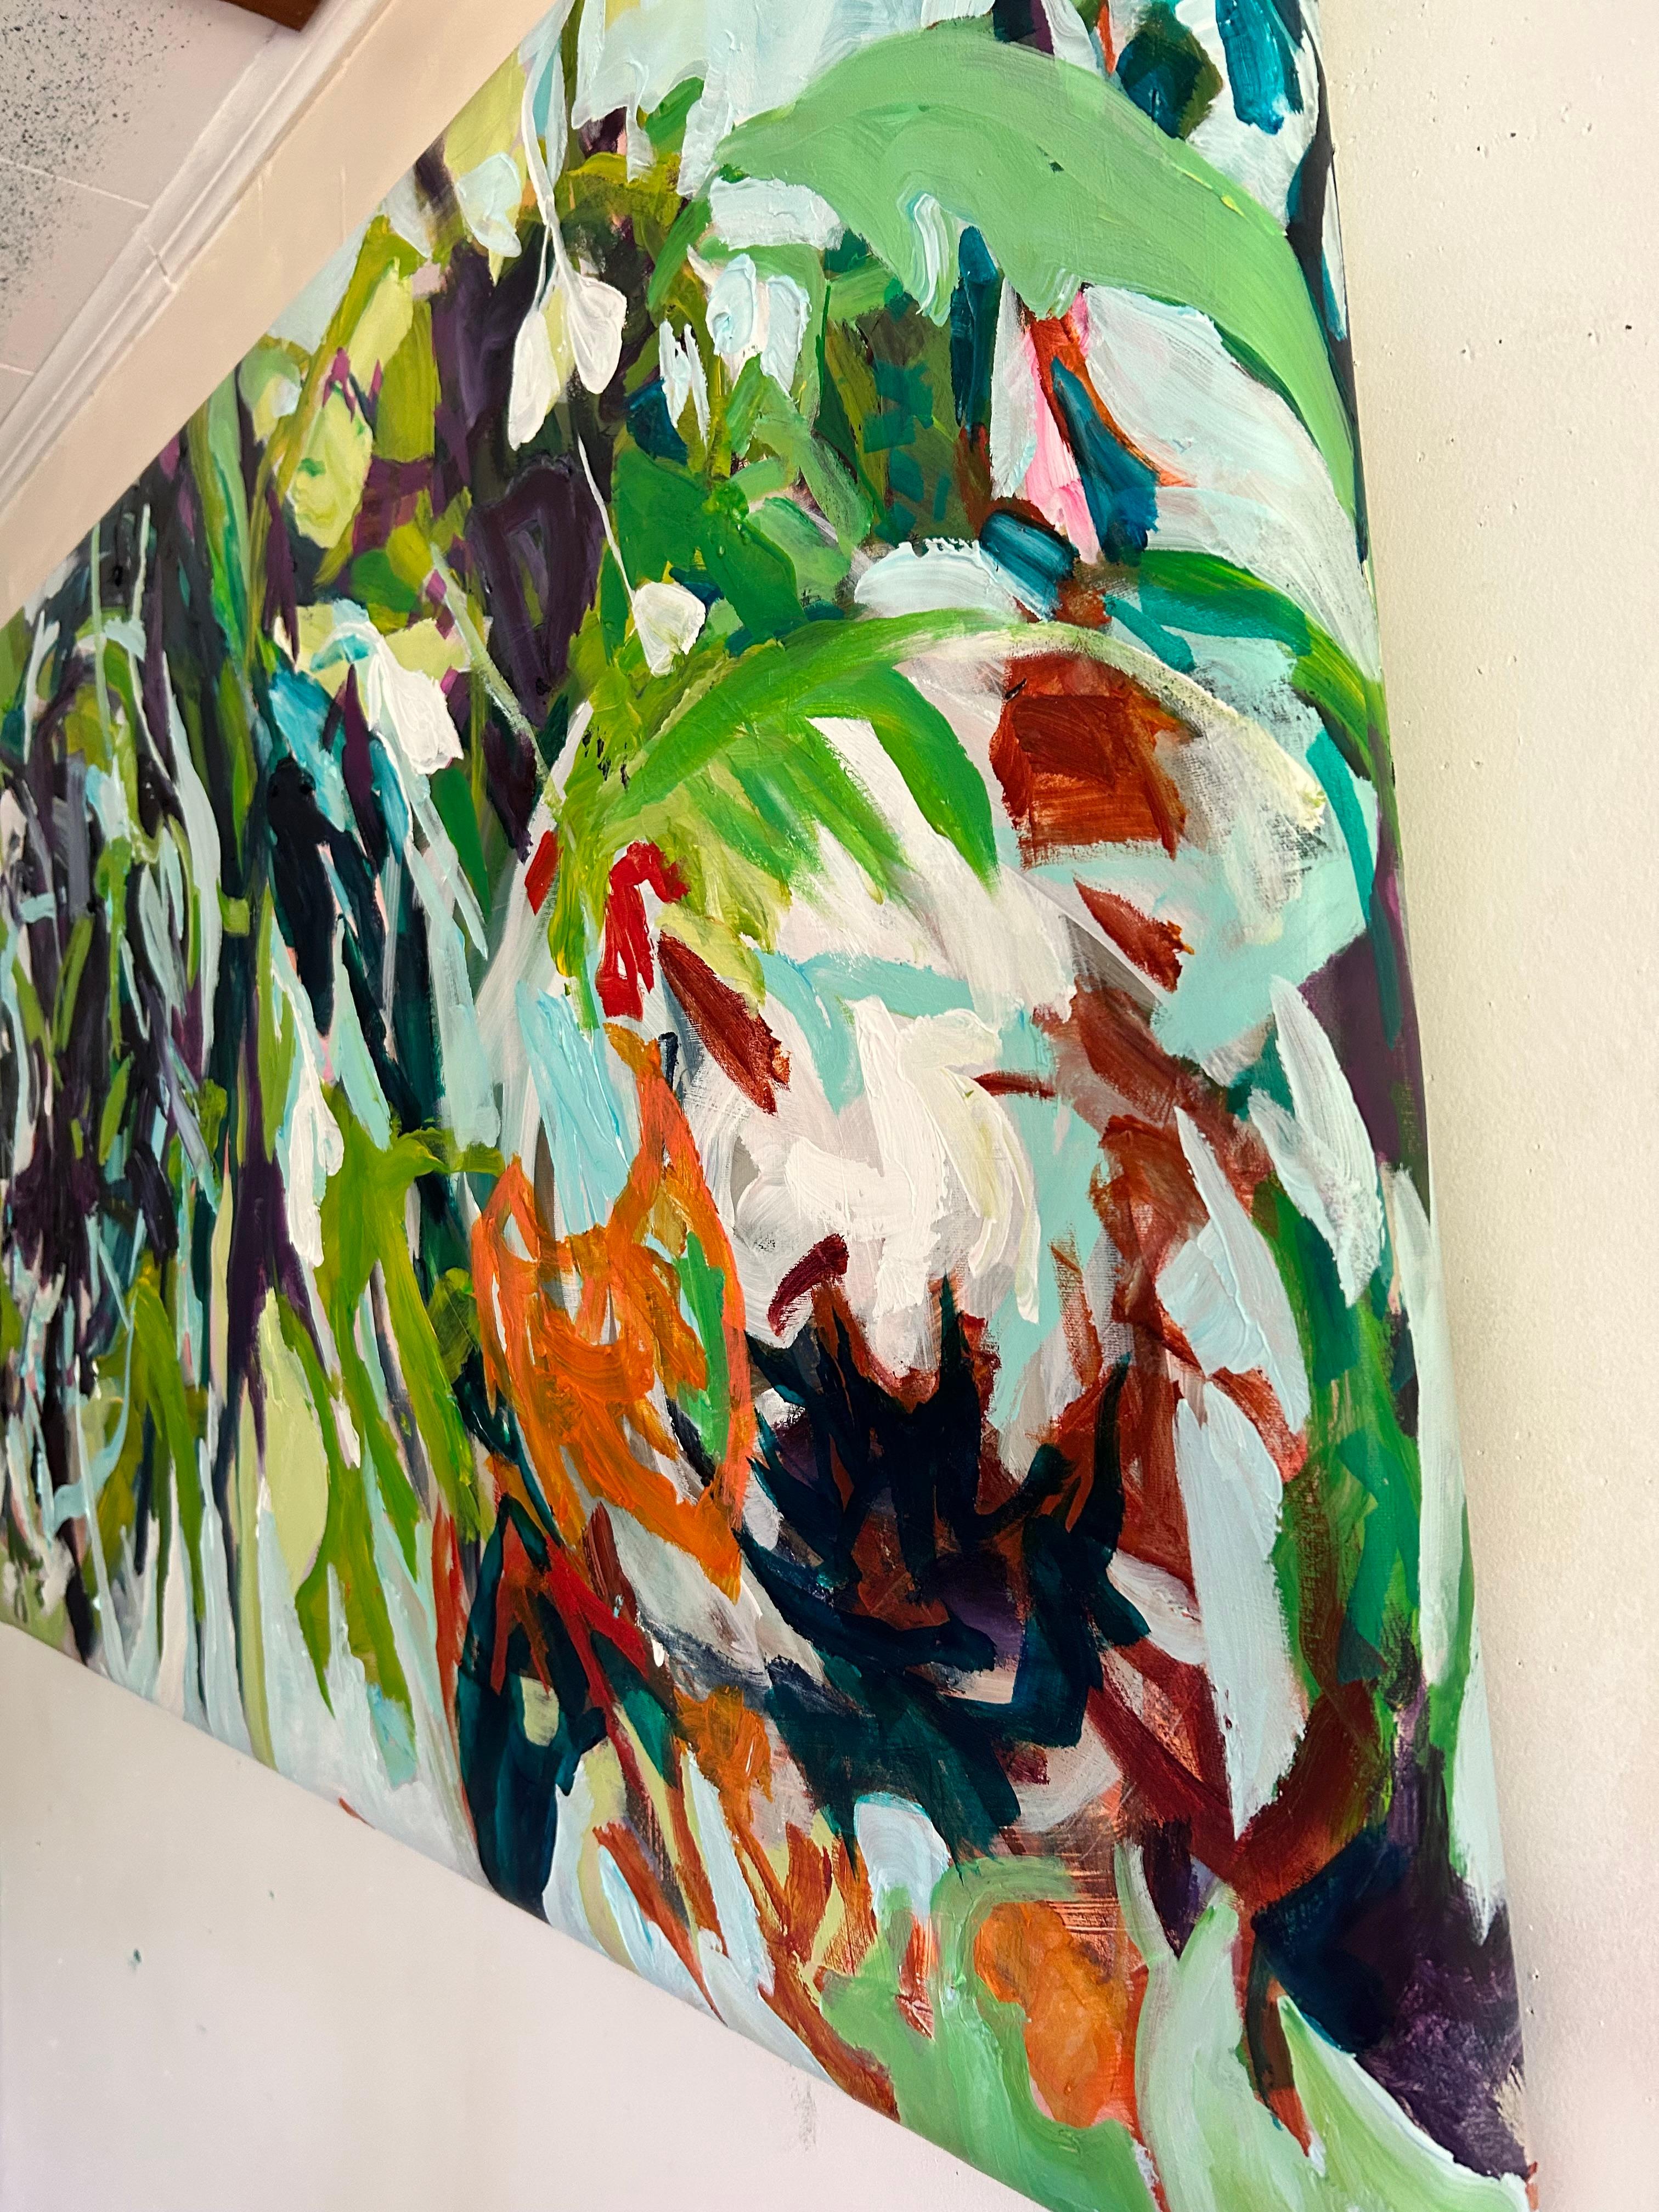 <p>Artist Comments<br>Artist Julia Hacker presents an abstract floral with lush green tones. It showcases the energy and movement of brushwork, mirroring the motion of plants in the summer wind. The intricate swirls and loops create a mesmerizing